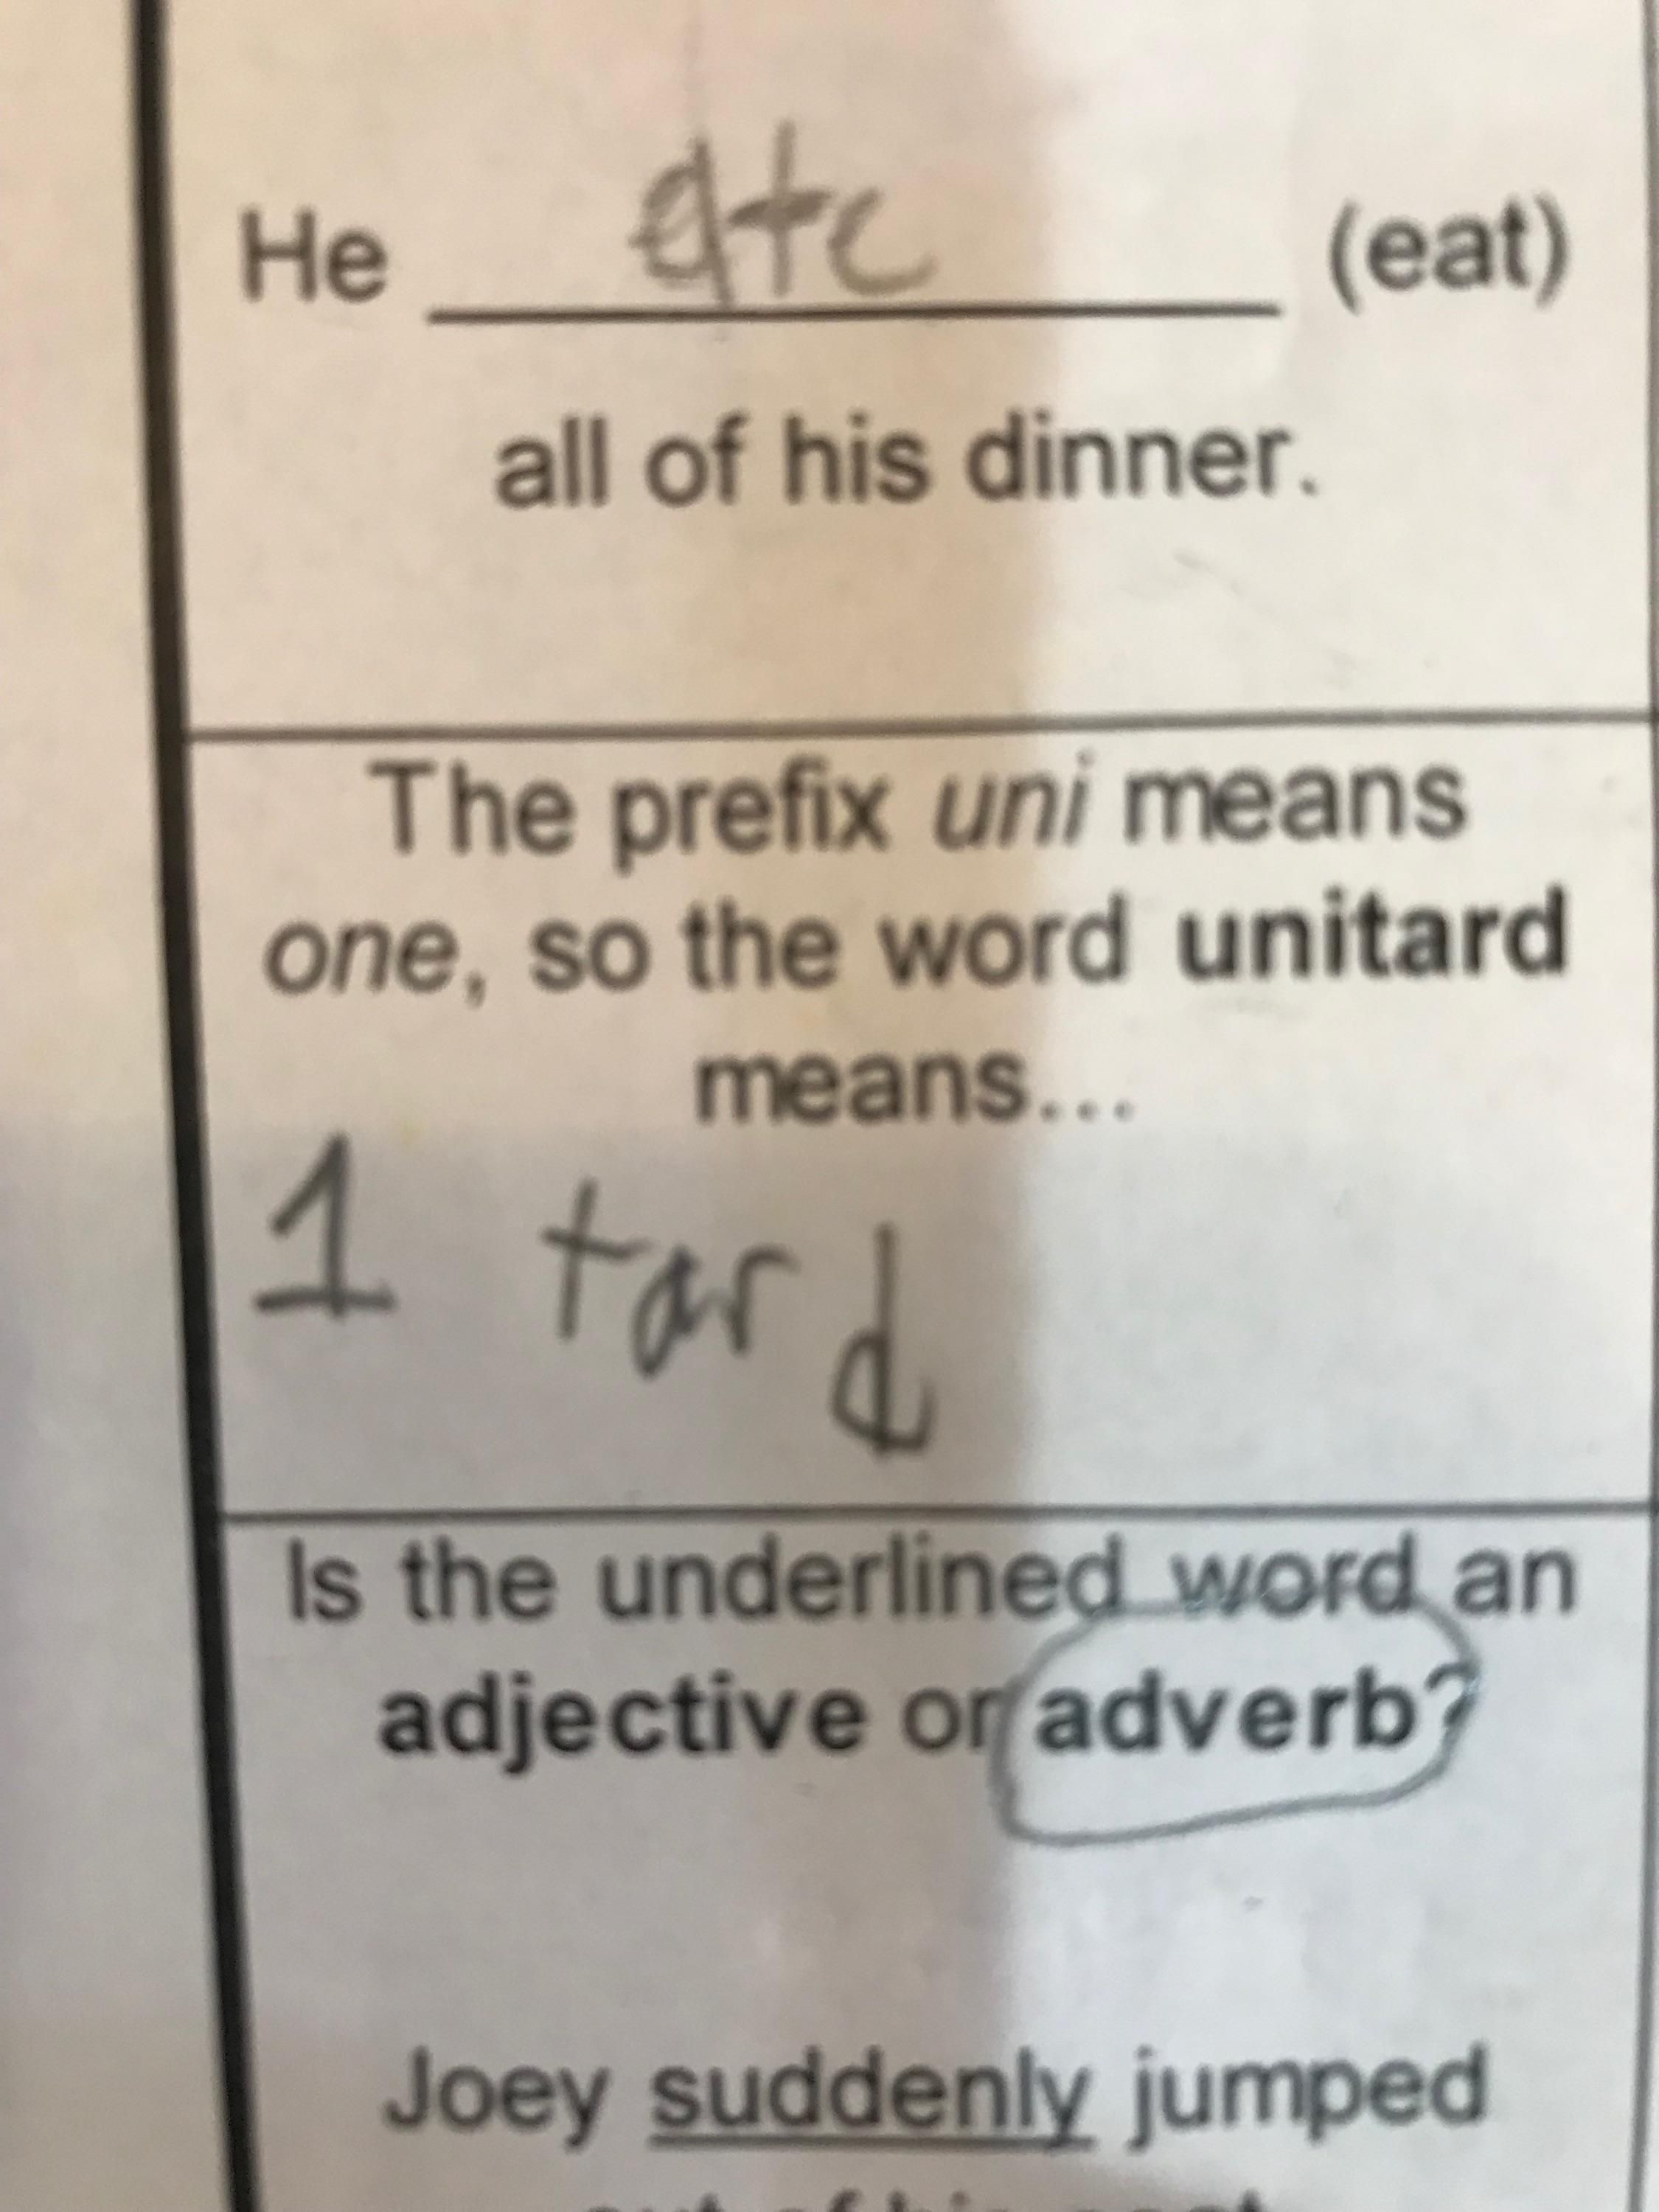 So, I’m proofing my 8 year old’s Homework when I stumble upon this gem...